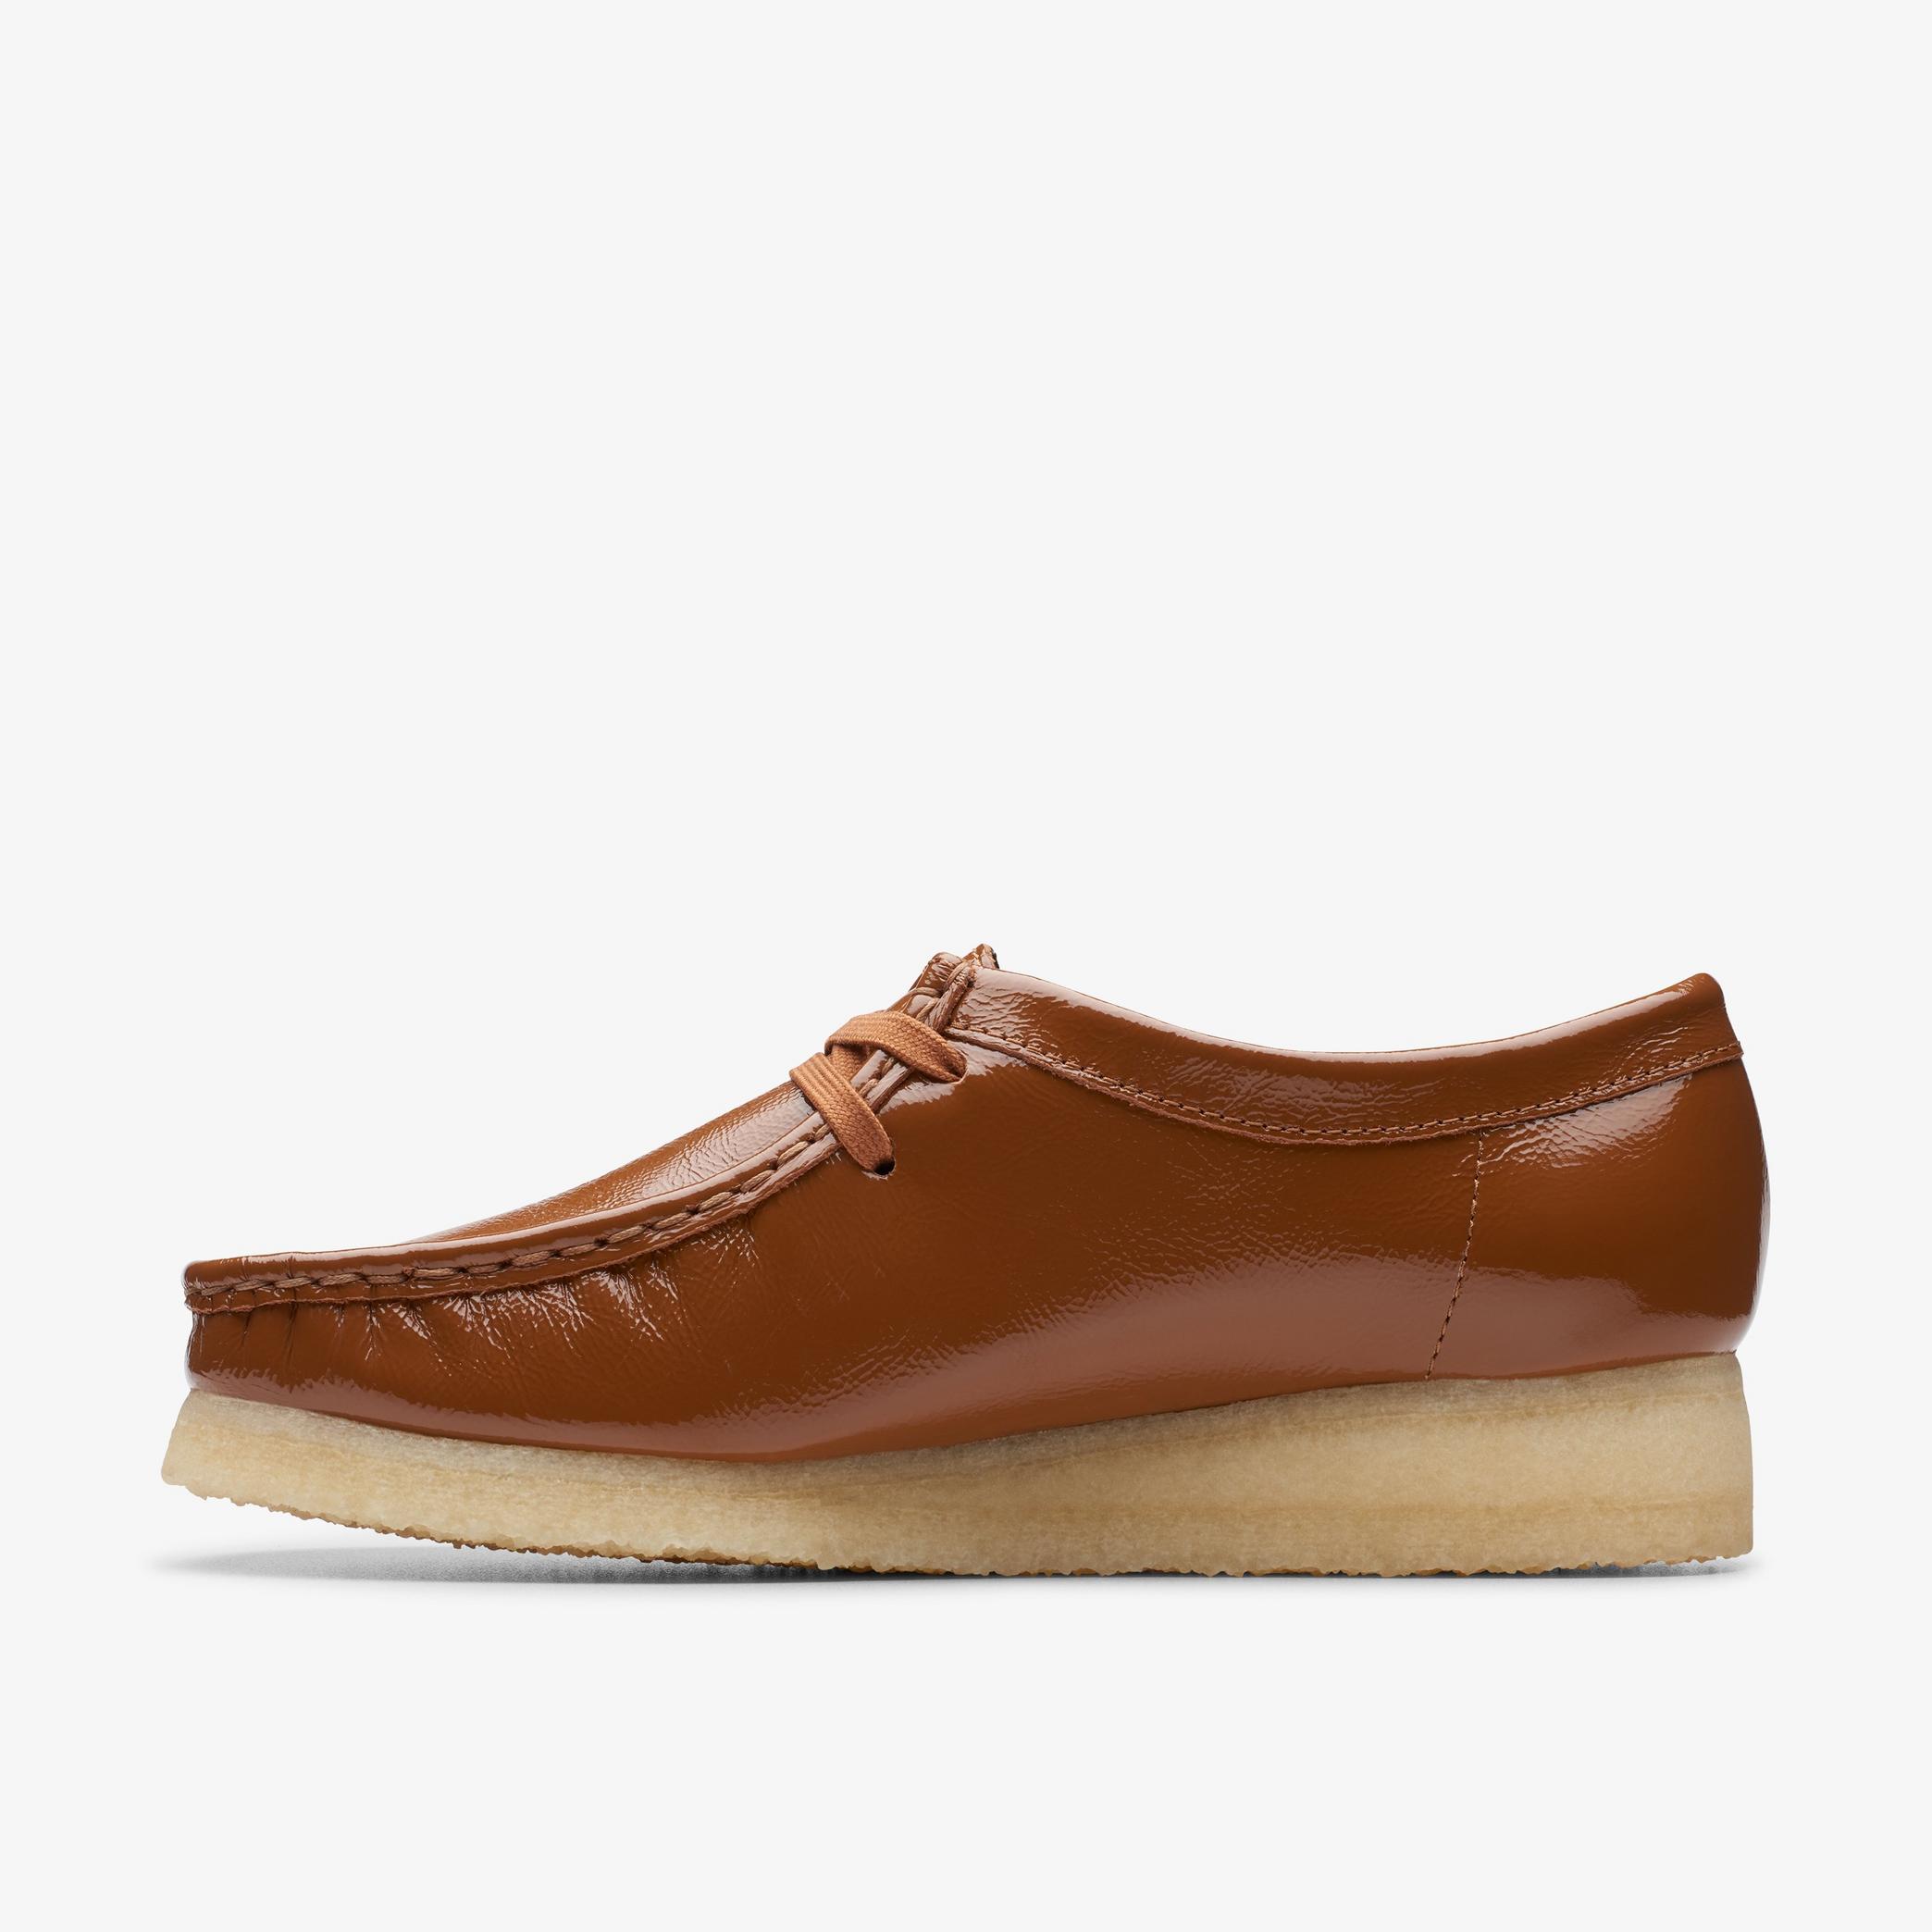 Wallabee Dusk Brown Patent Shoes, view 2 of 6